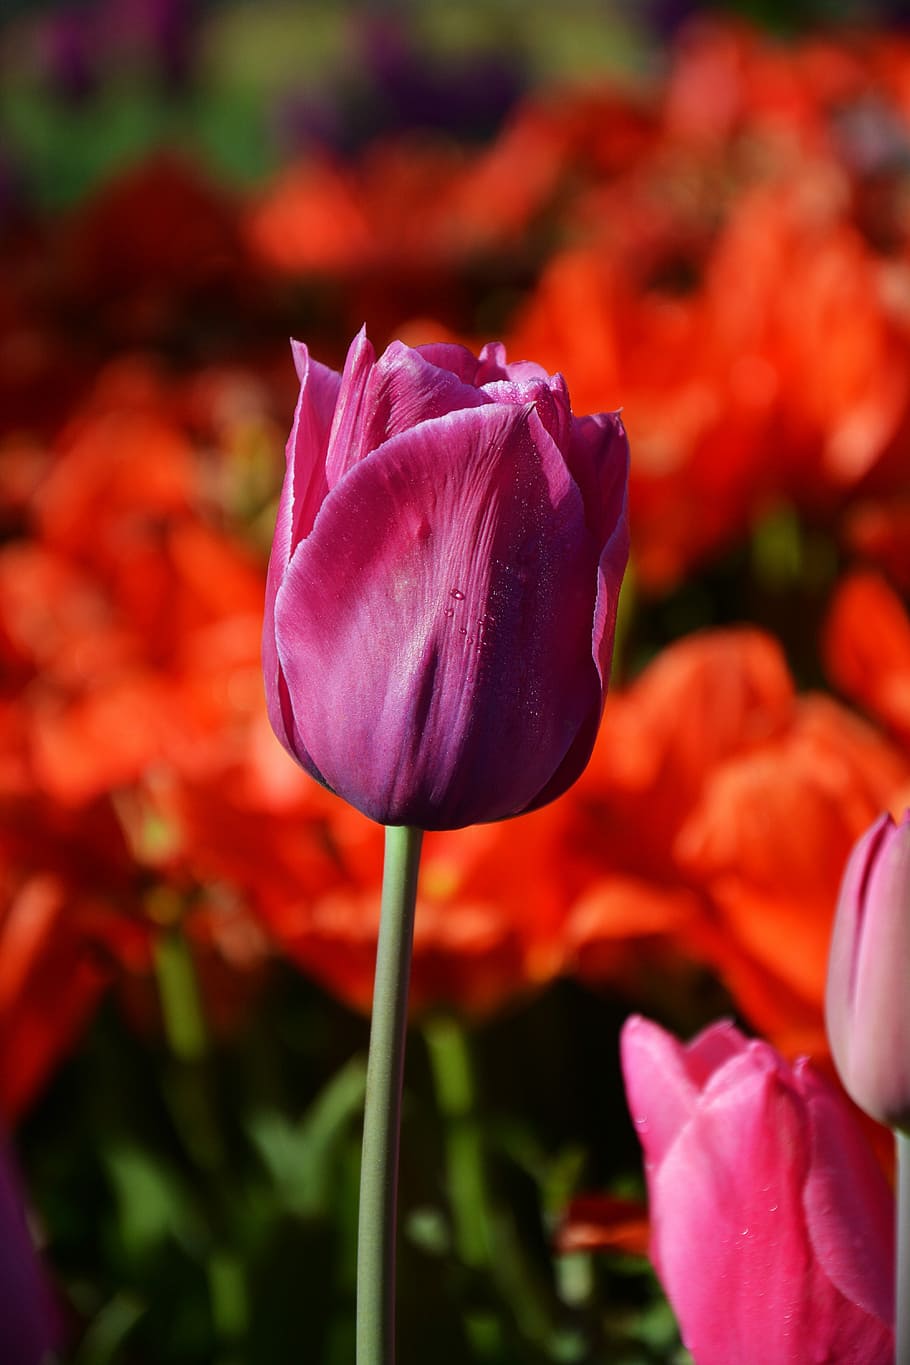 selective, focus photo, purple, rose, tulips, red, macro, vivid color, nature, close-up